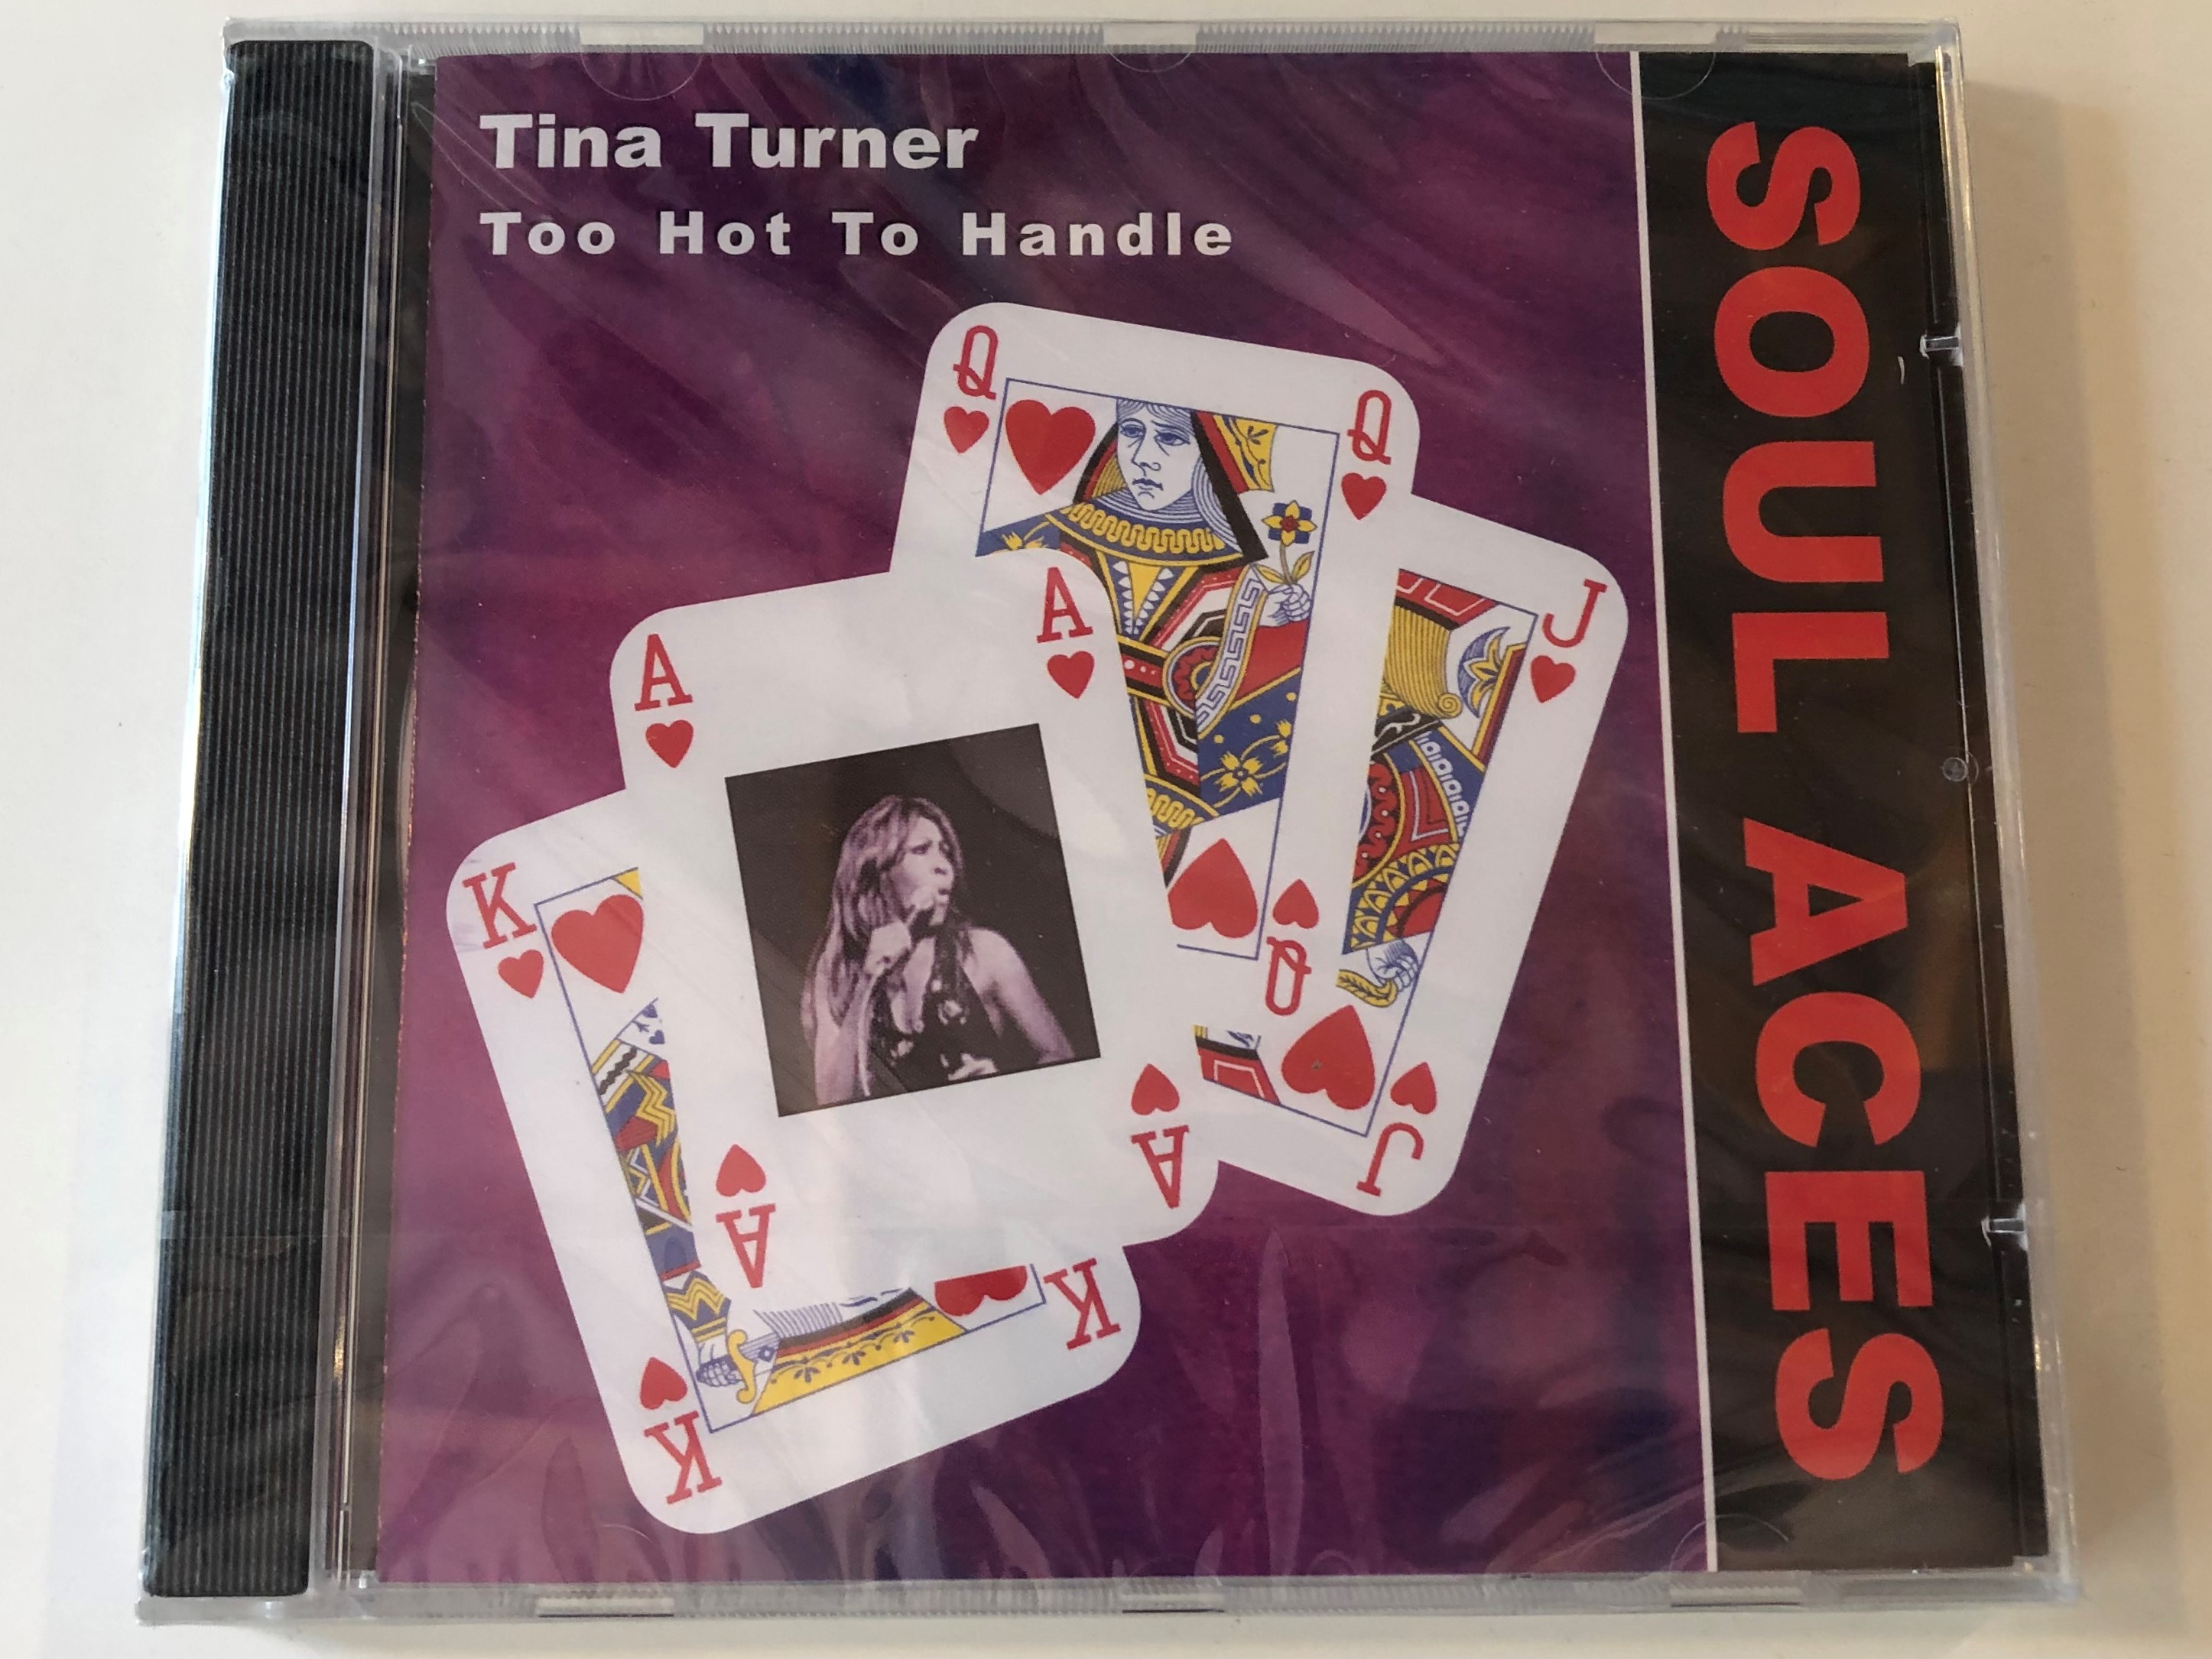 tina-turner-too-hot-to-handle-soul-aces-dressed-to-kill-audio-cd-1999-666629117521-1-.jpg